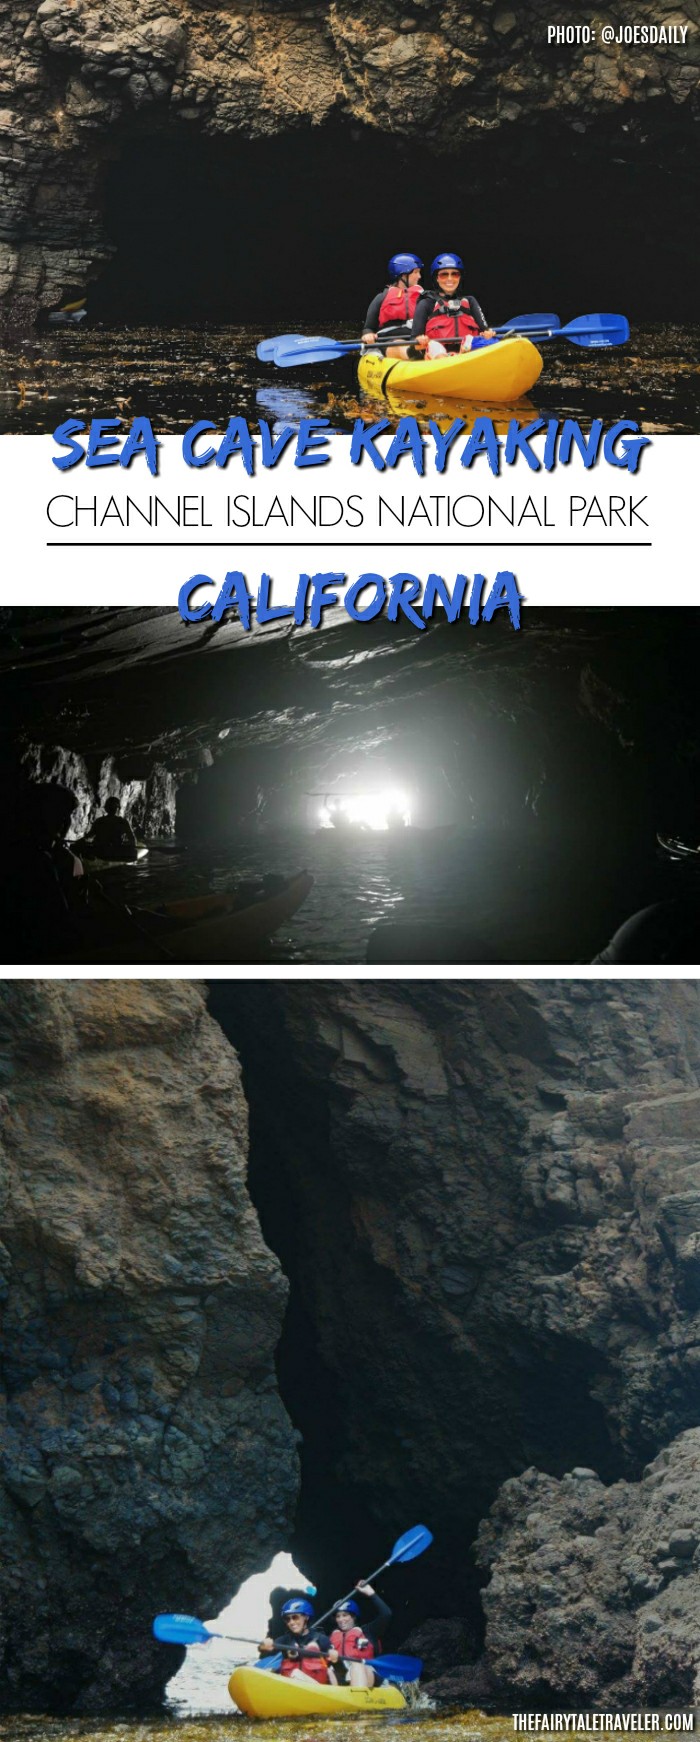 Sea cave kayaking channel islands national park california 700x1742 1